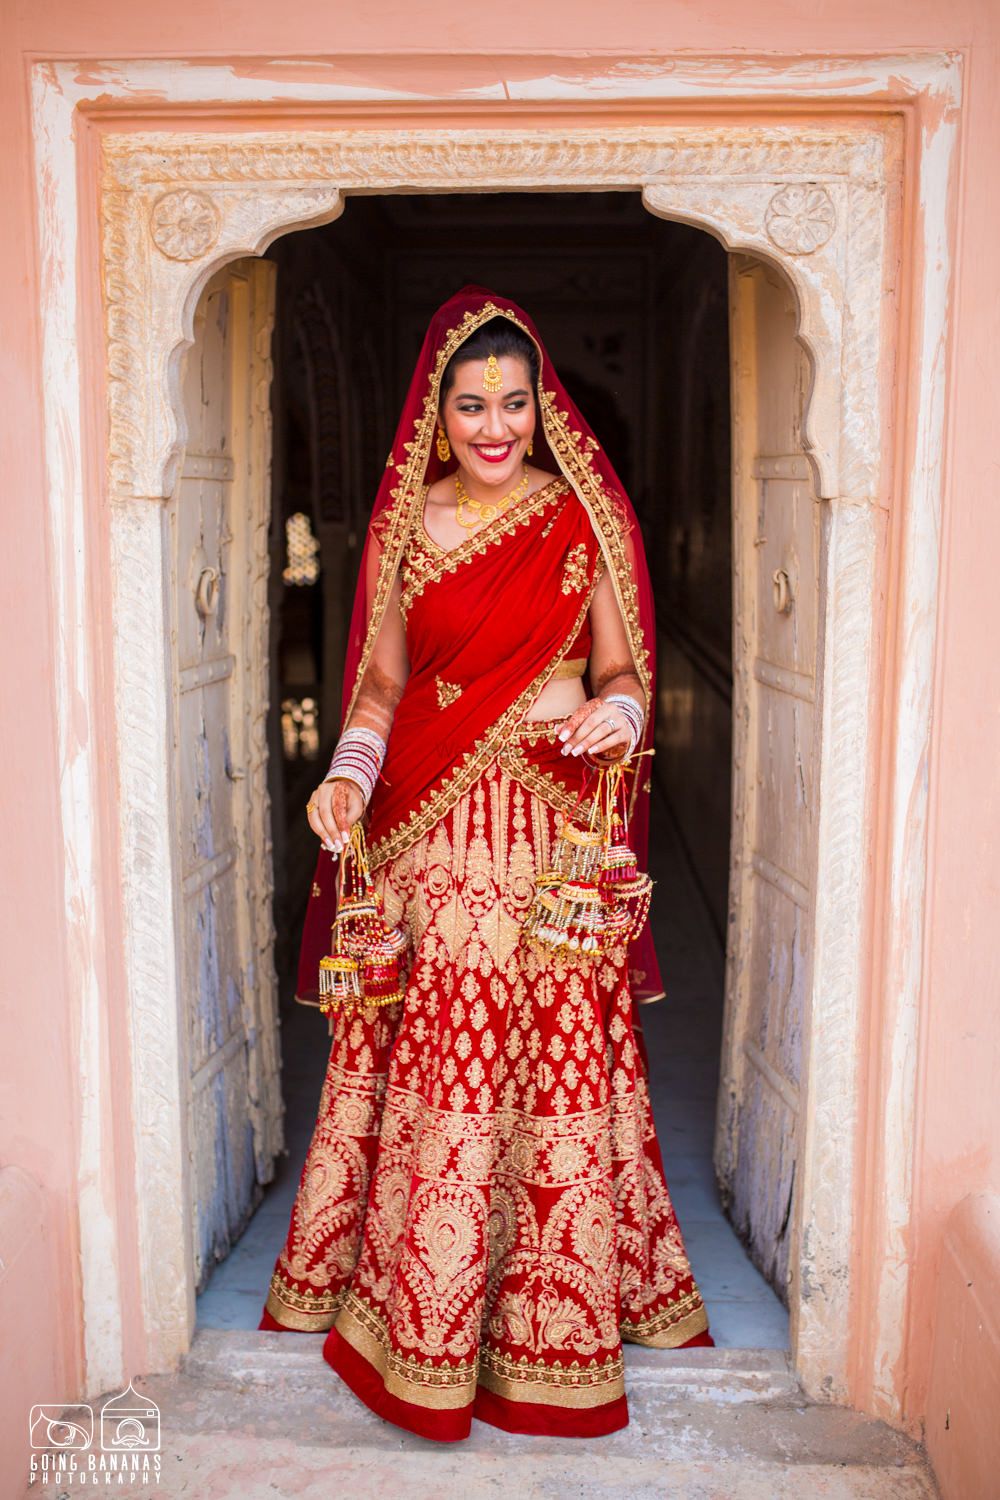 Photo of Bride Entering in Bright Red and Gold Bridal Lehenga